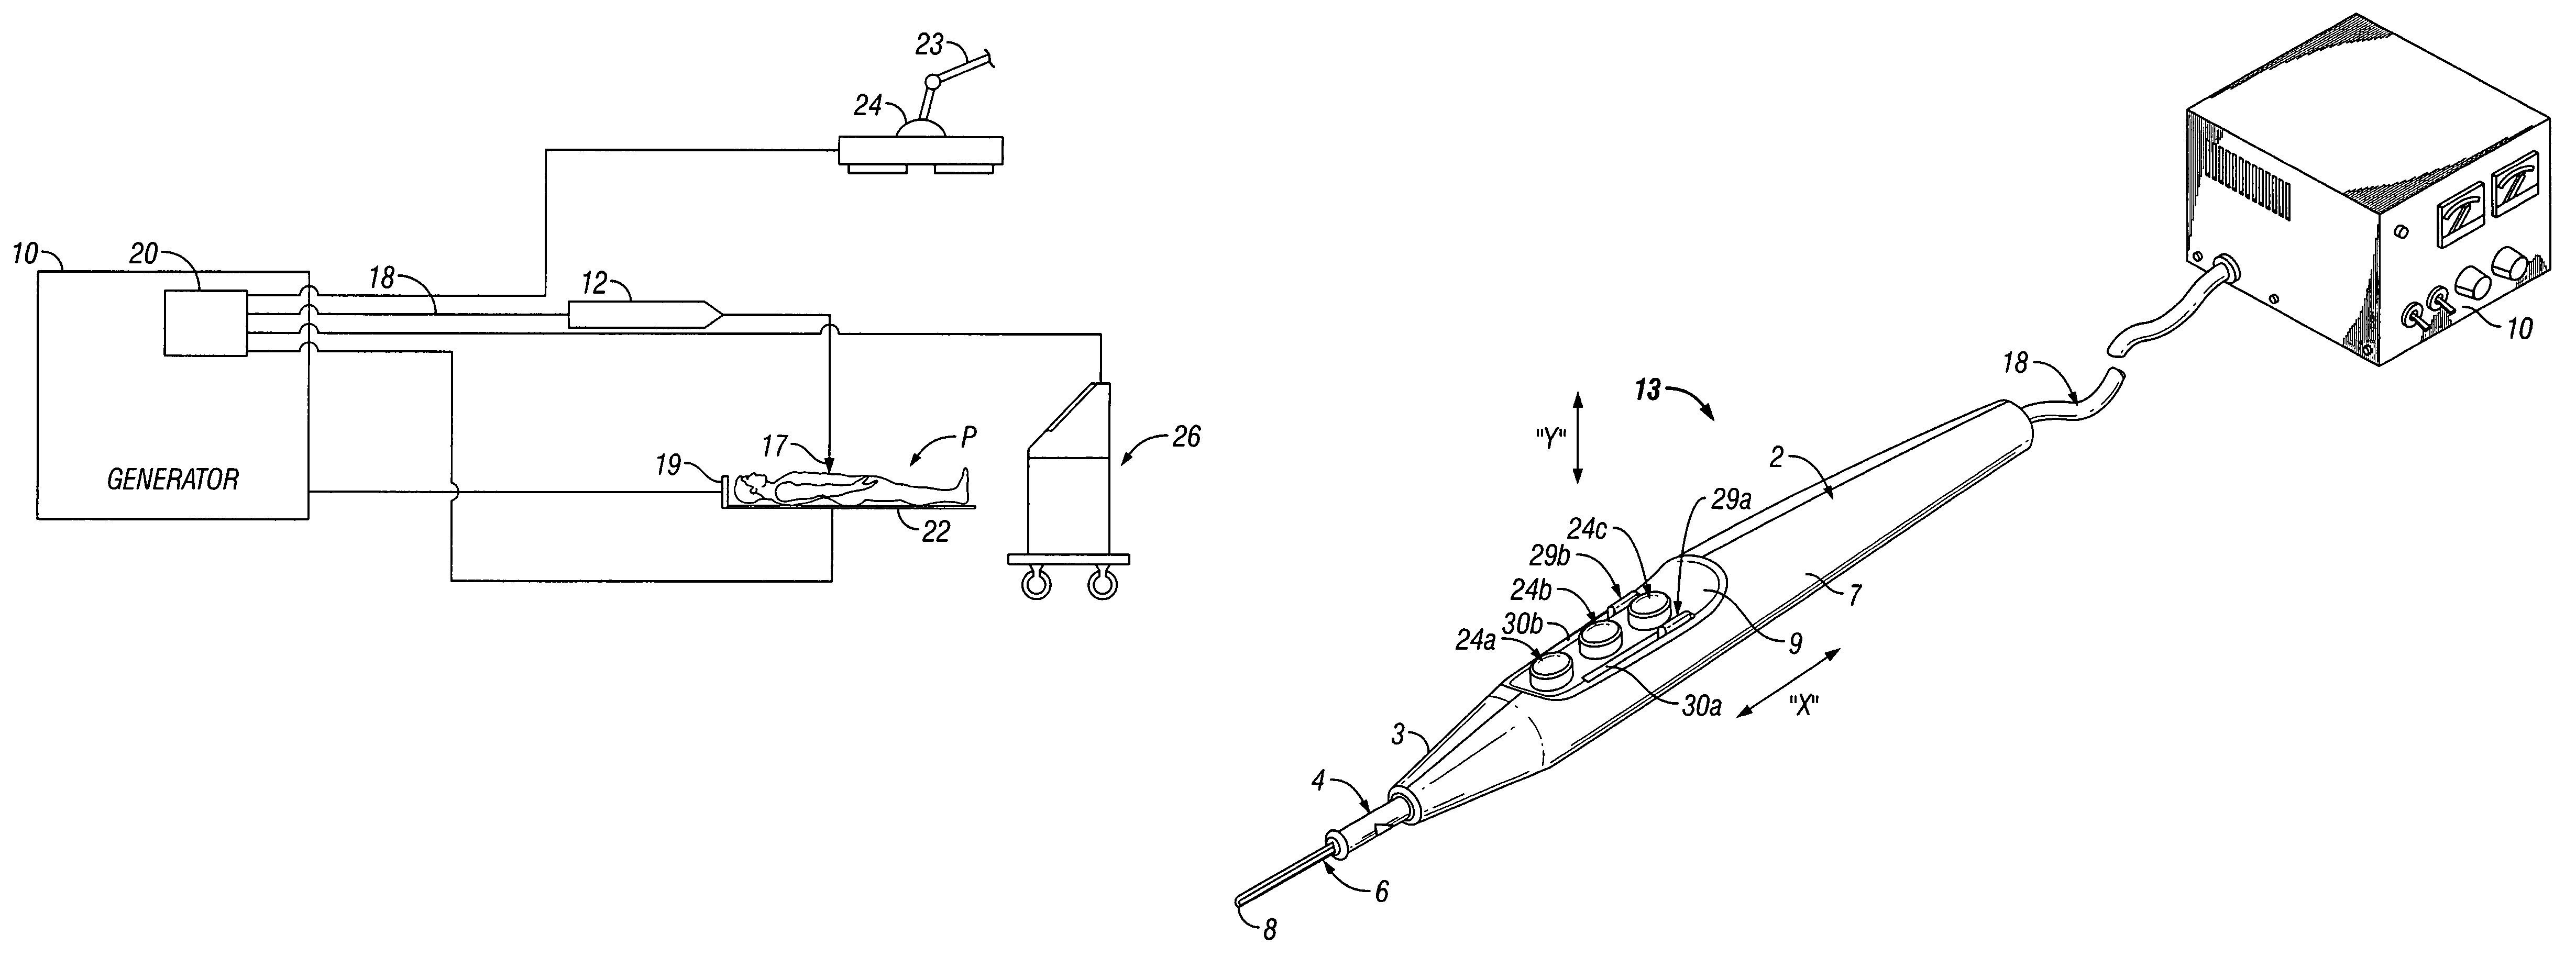 Handheld electrosurgical apparatus for controlling operating room equipment